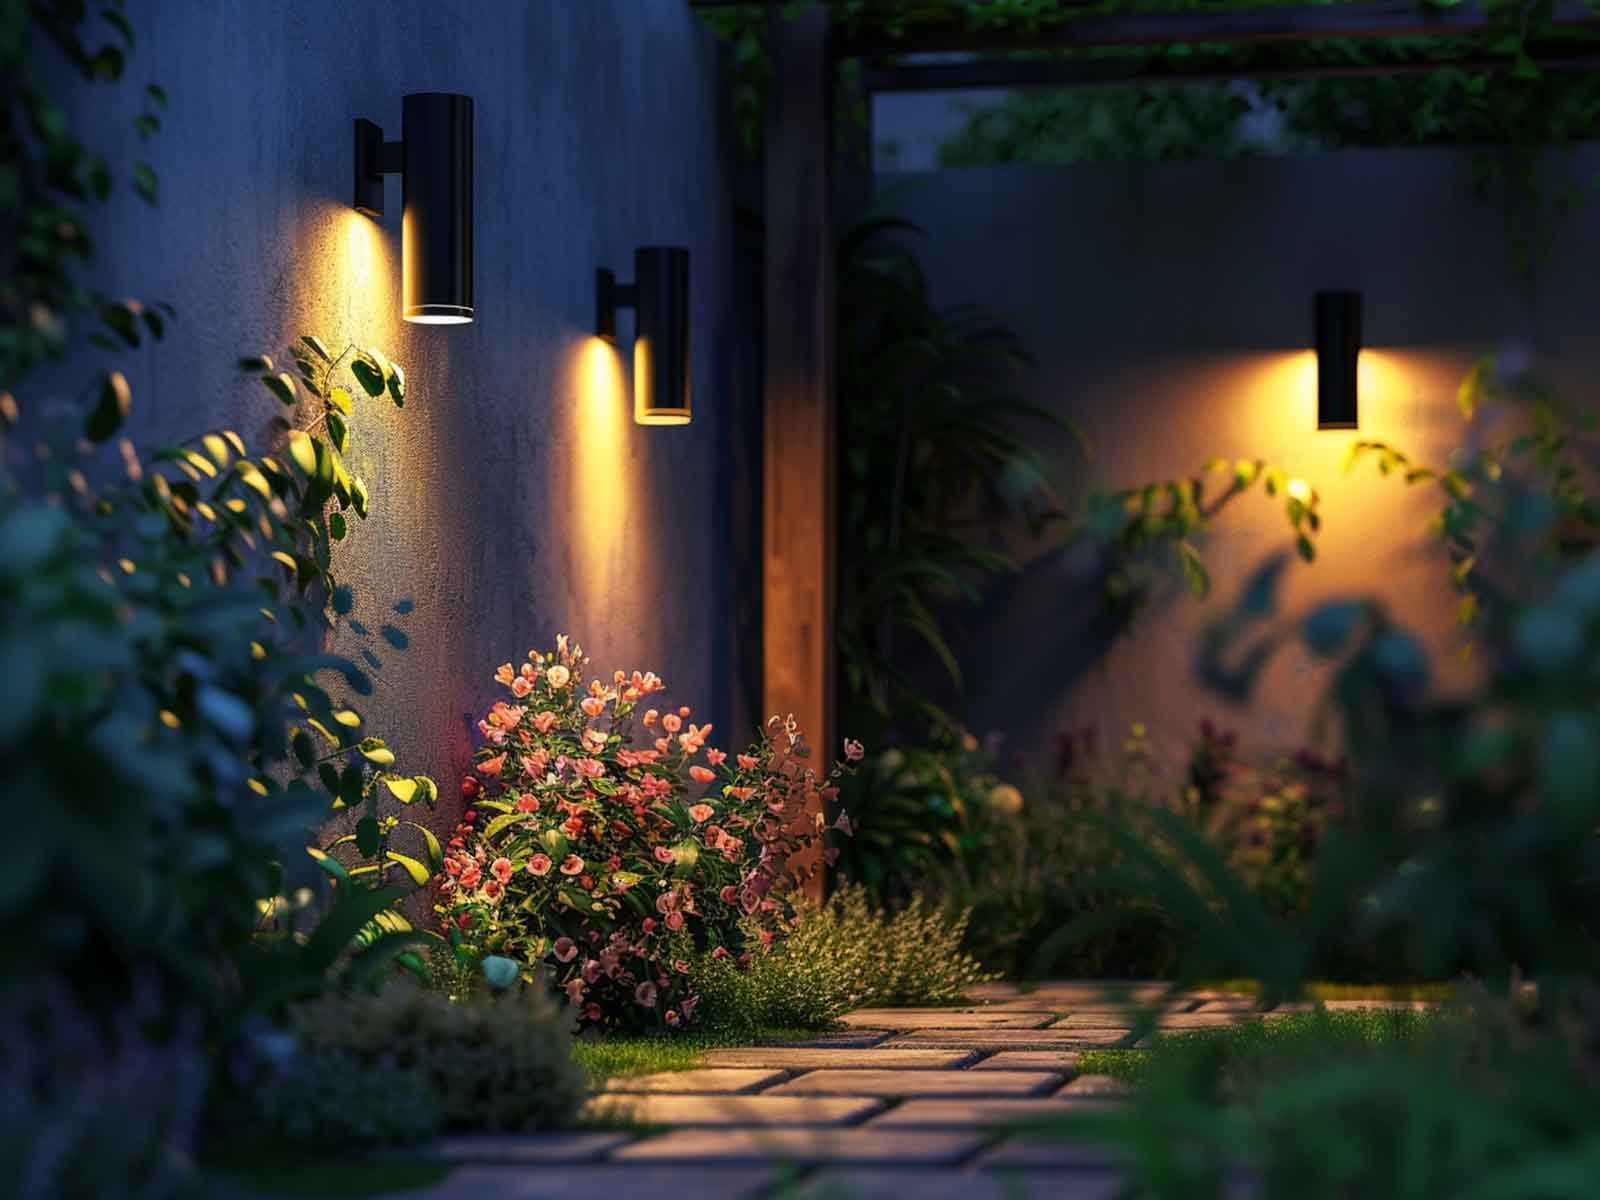 Outdoor wall sconces creating a gentle glow in a garden